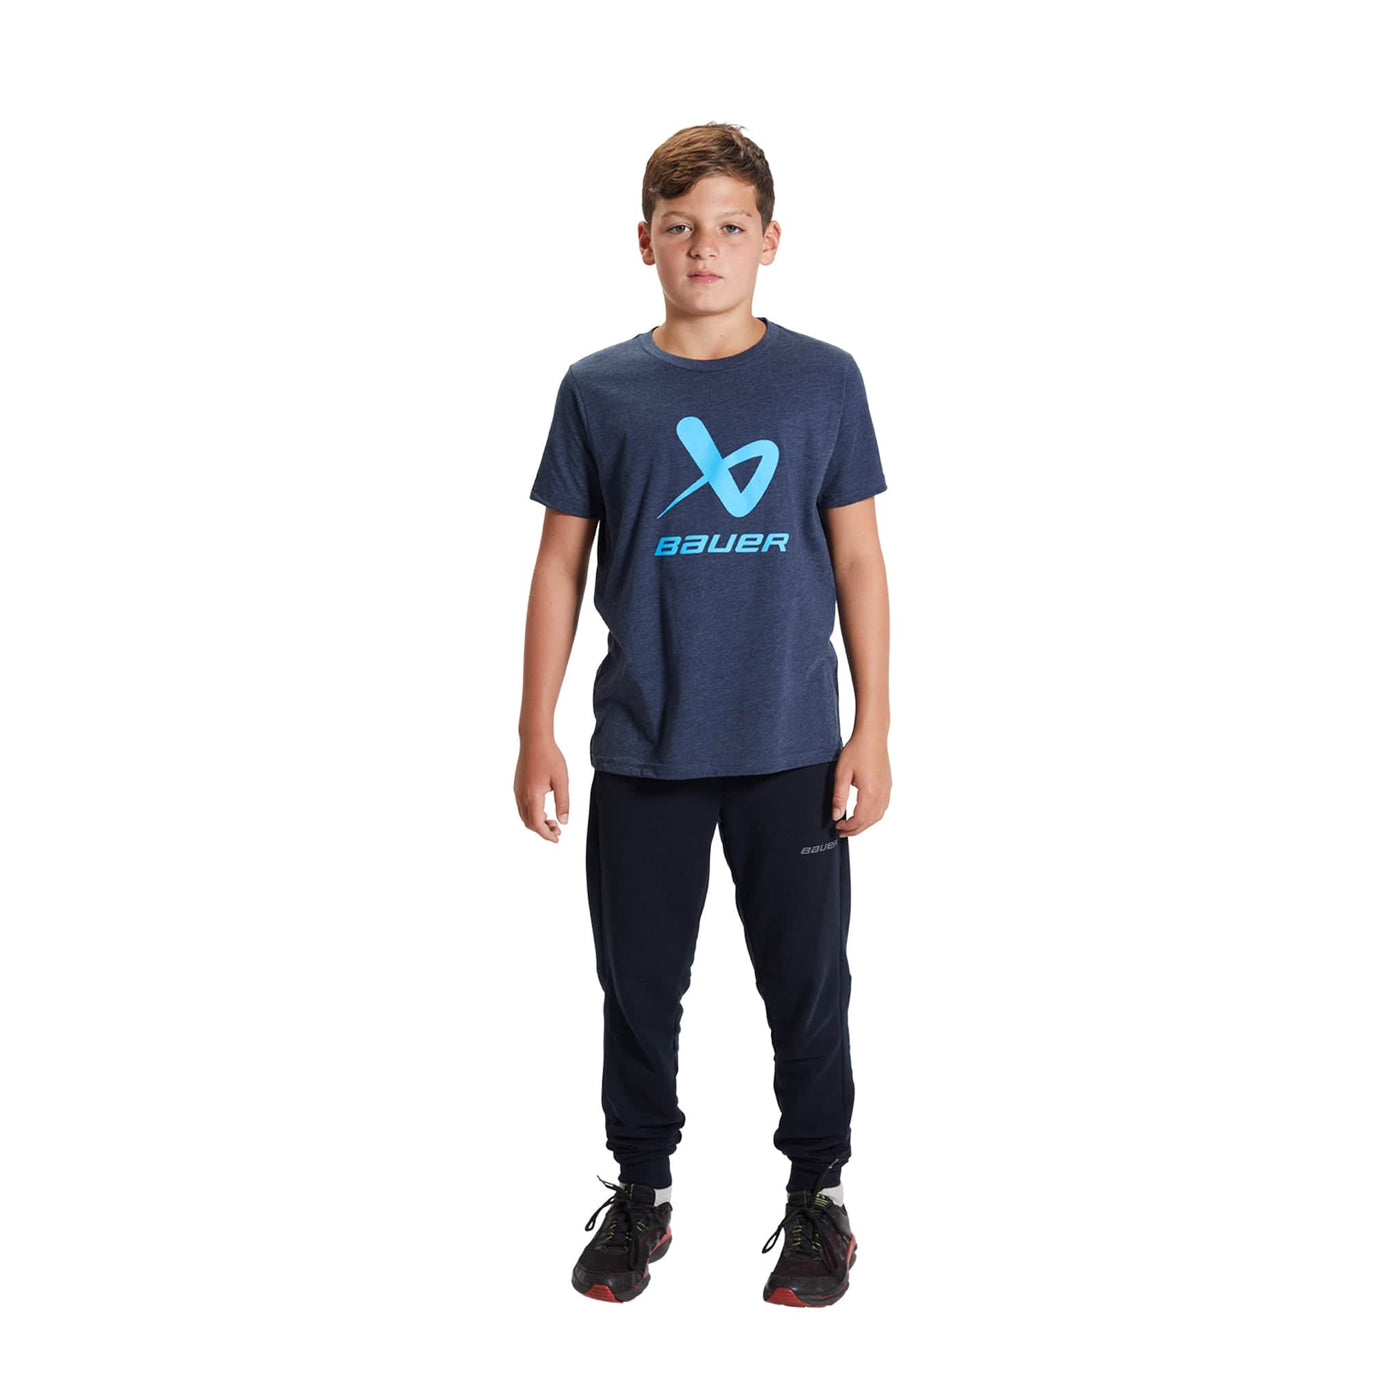 Bauer Core Lockup Youth Shortsleeve Shirt - The Hockey Shop Source For Sports